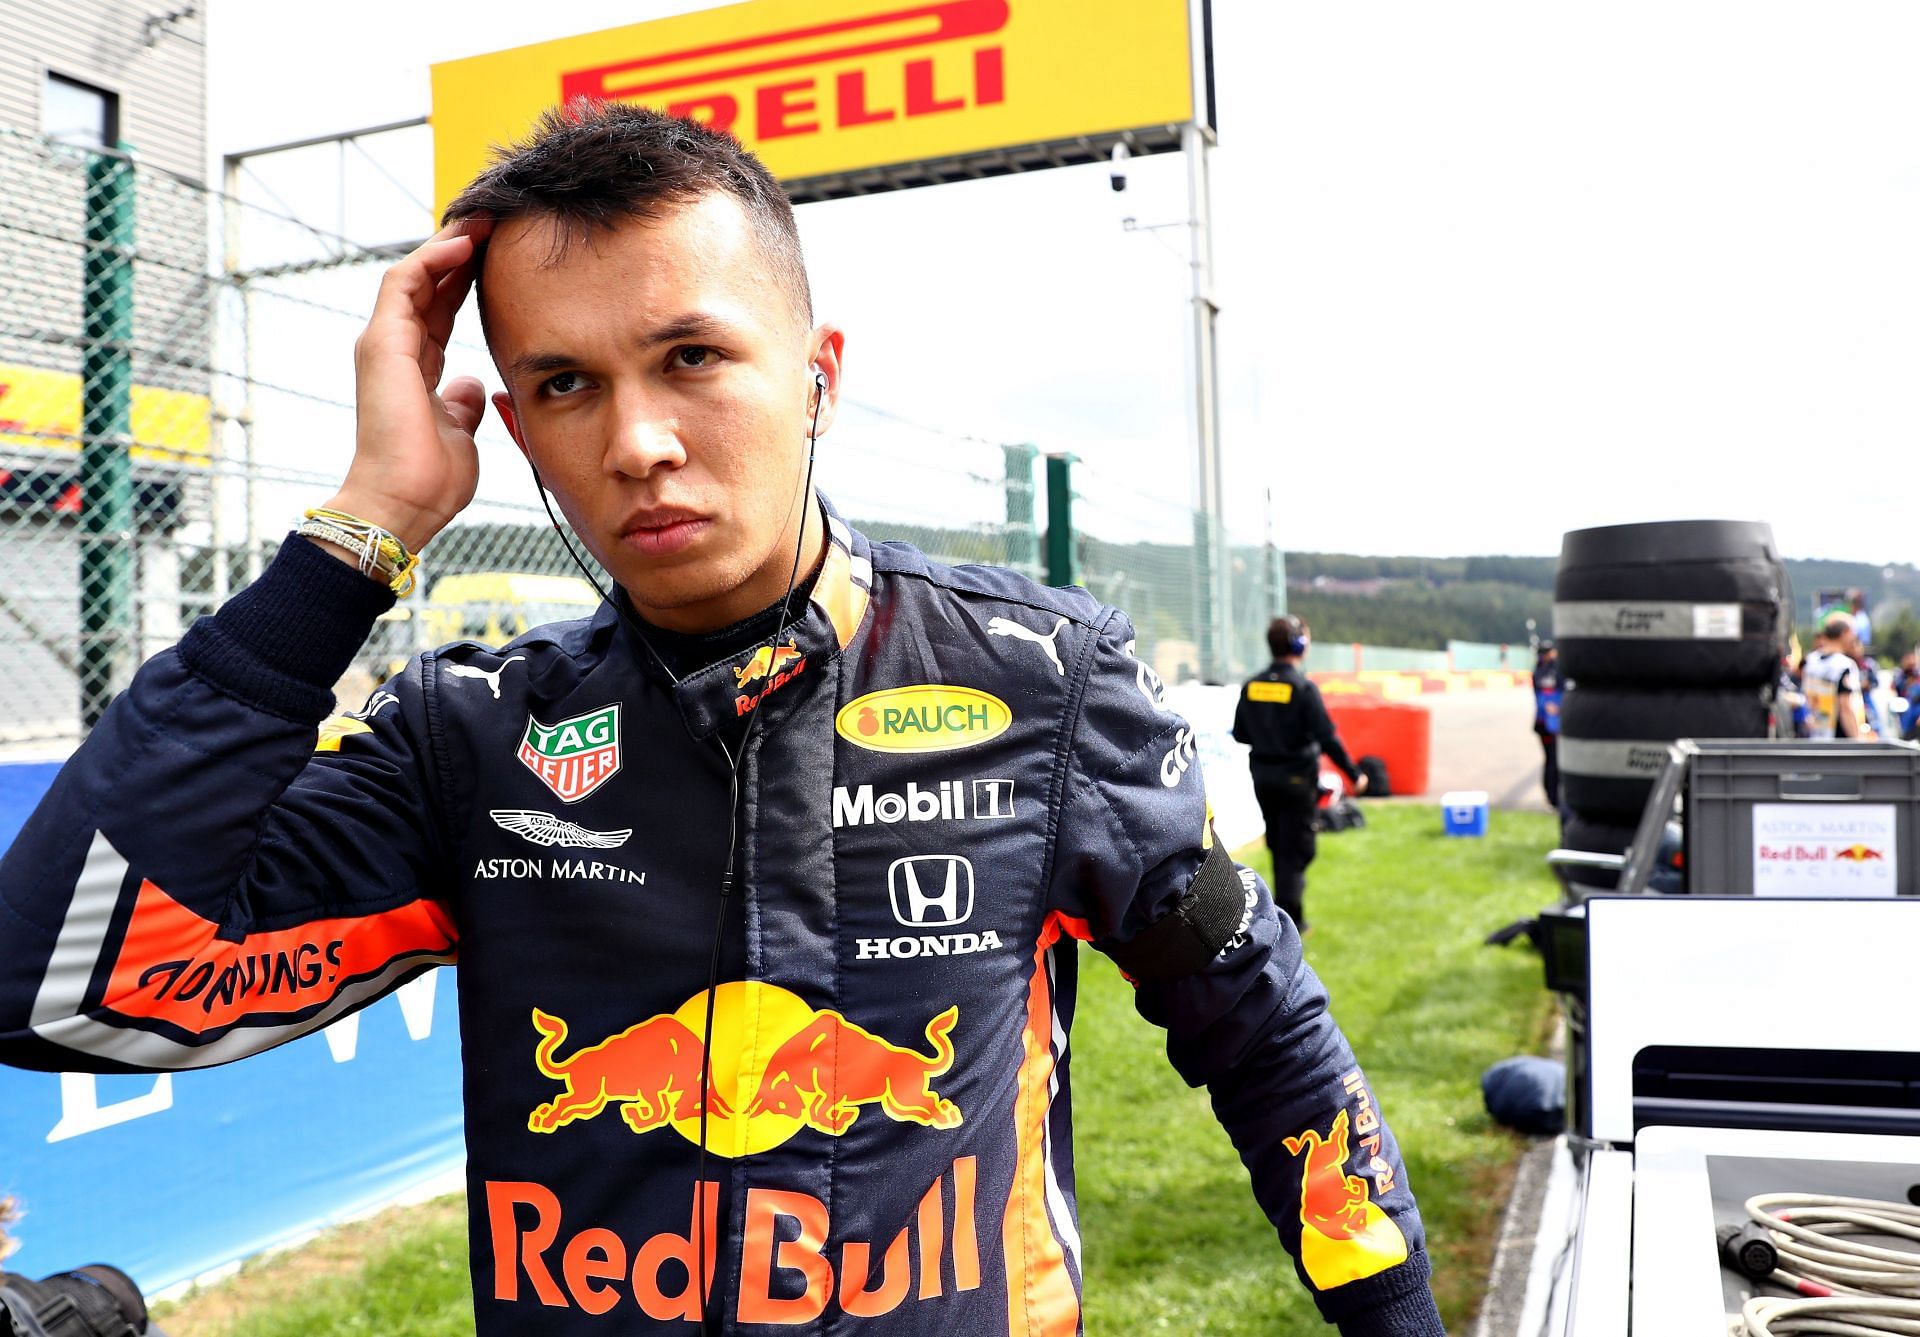 Alex Albon photographed during his Red Bull debut at the 2019 F1 Belgian GP weekend (Photo by Mark Thompson/Getty Images)